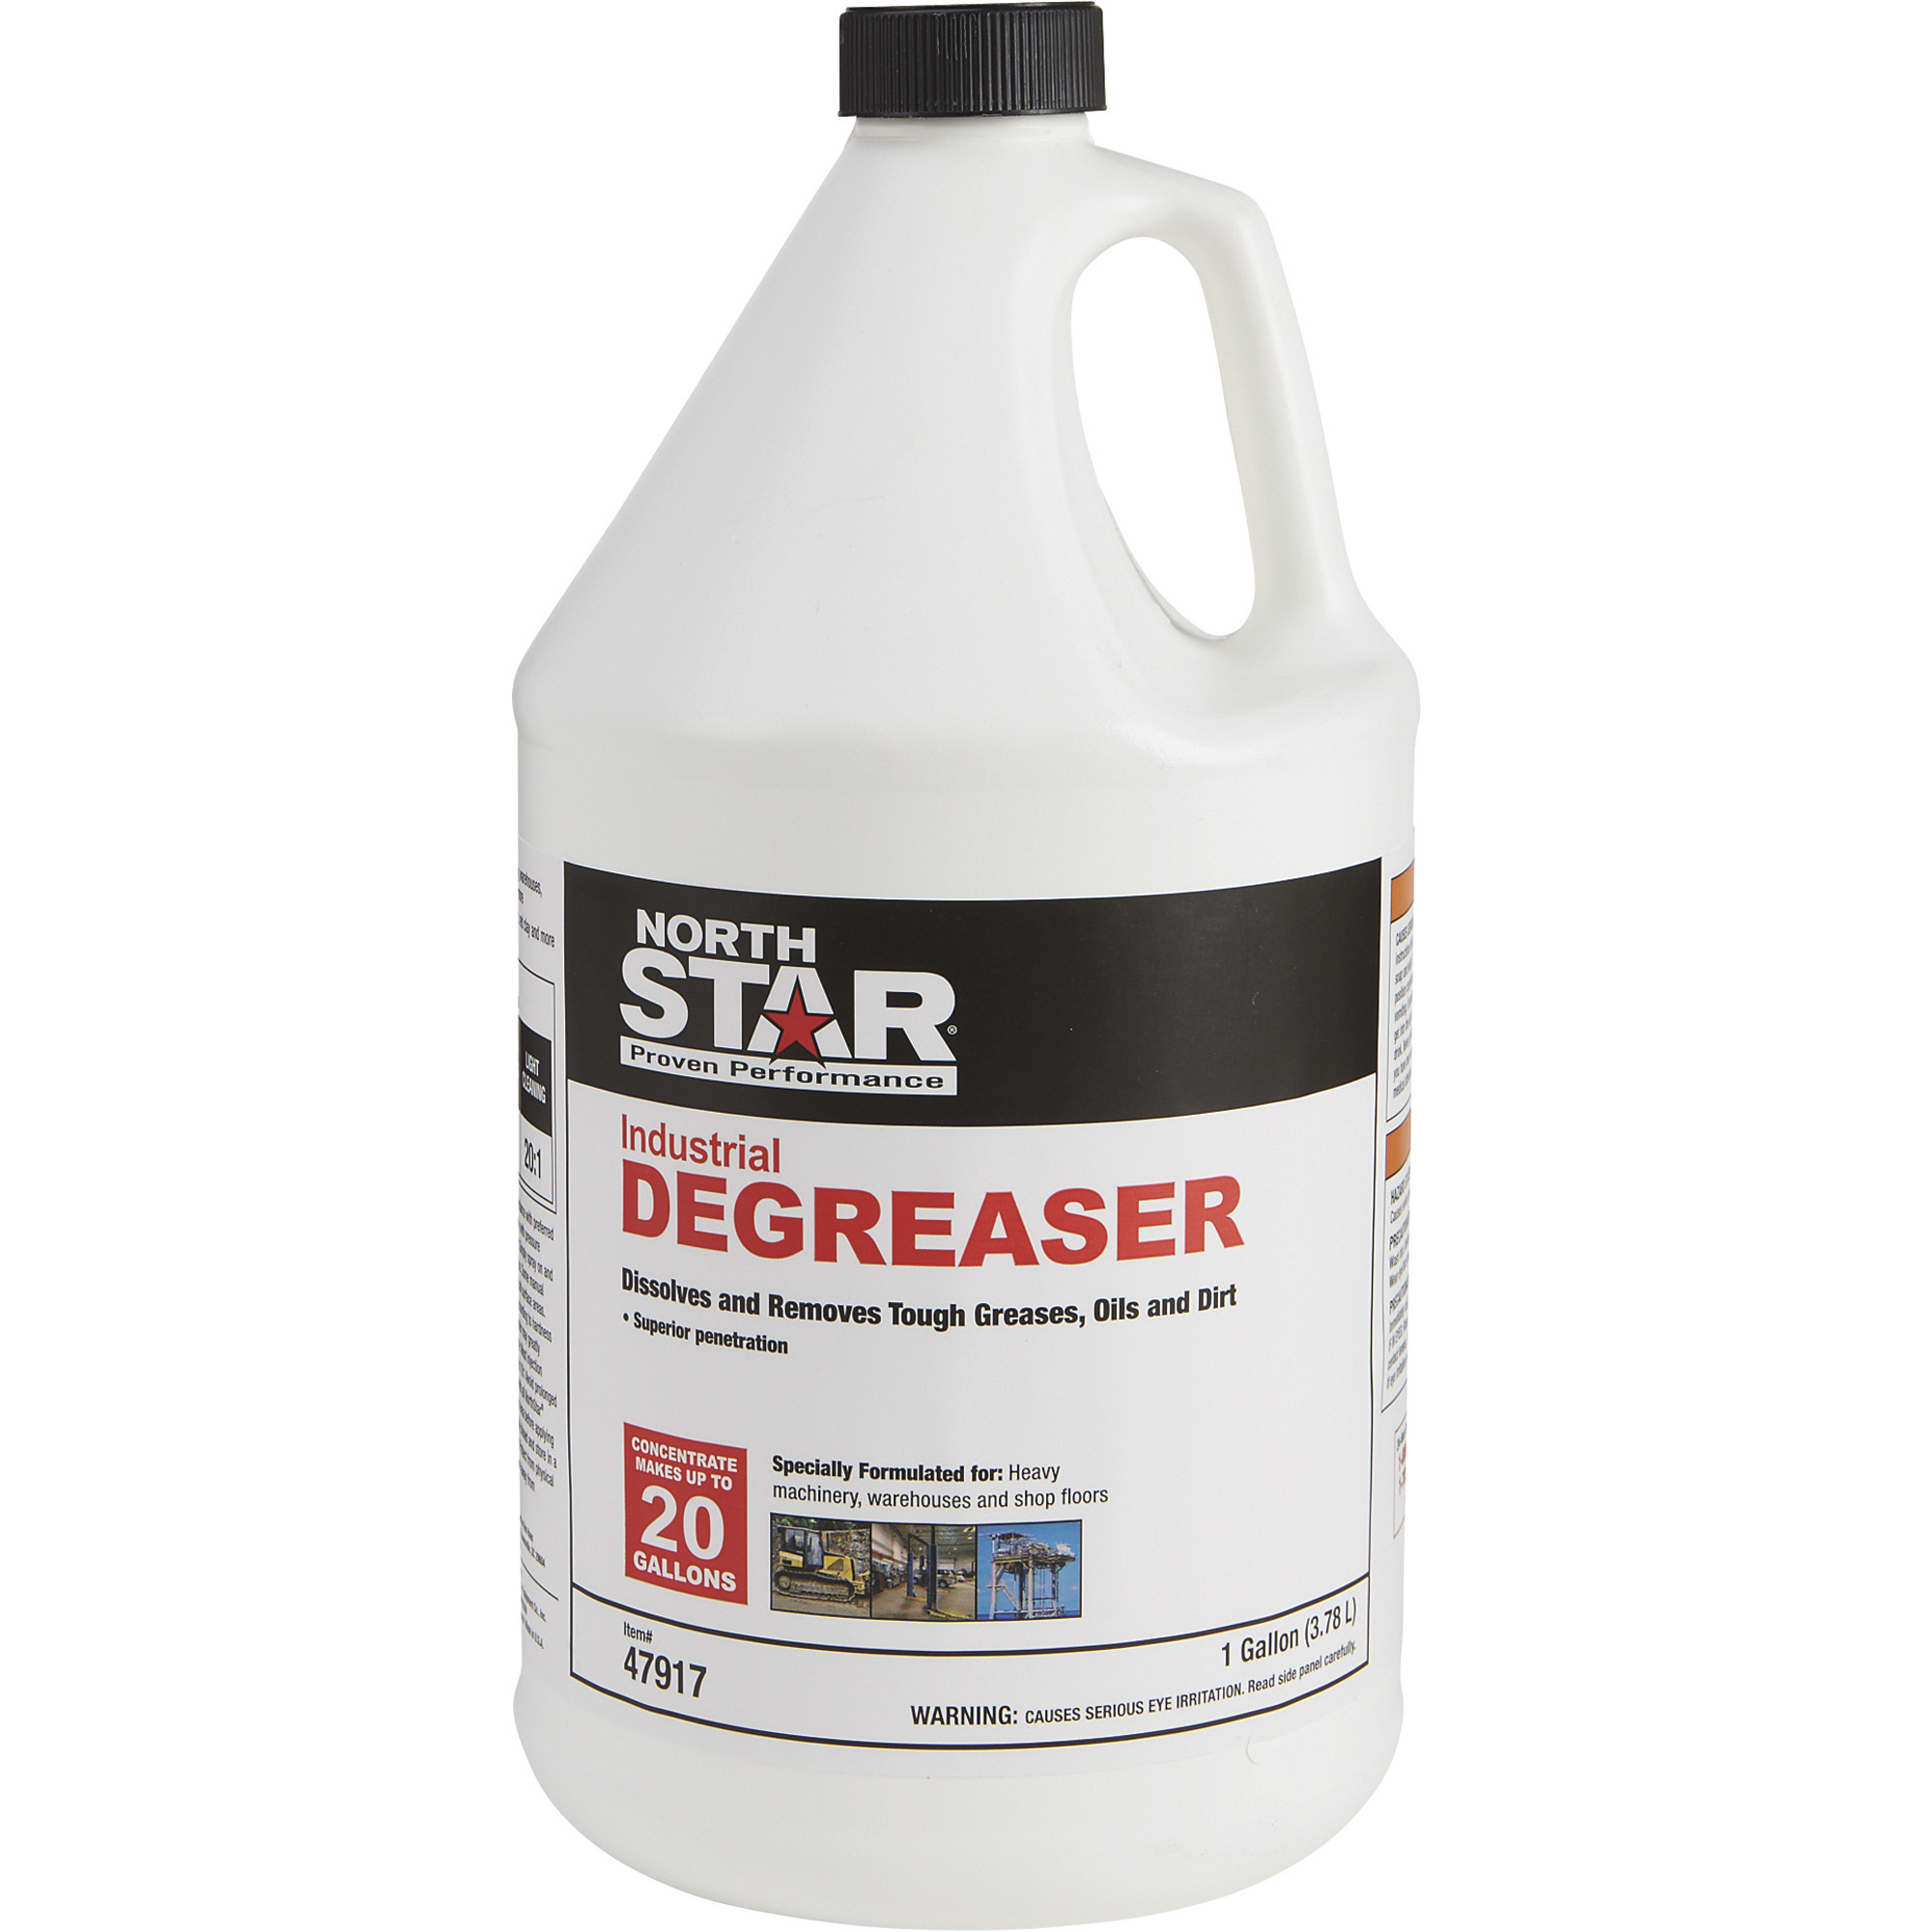 NorthStar Pressure Washer High-Performance Degreaser Concentrate â 1-Gallon, Model NSDEG1